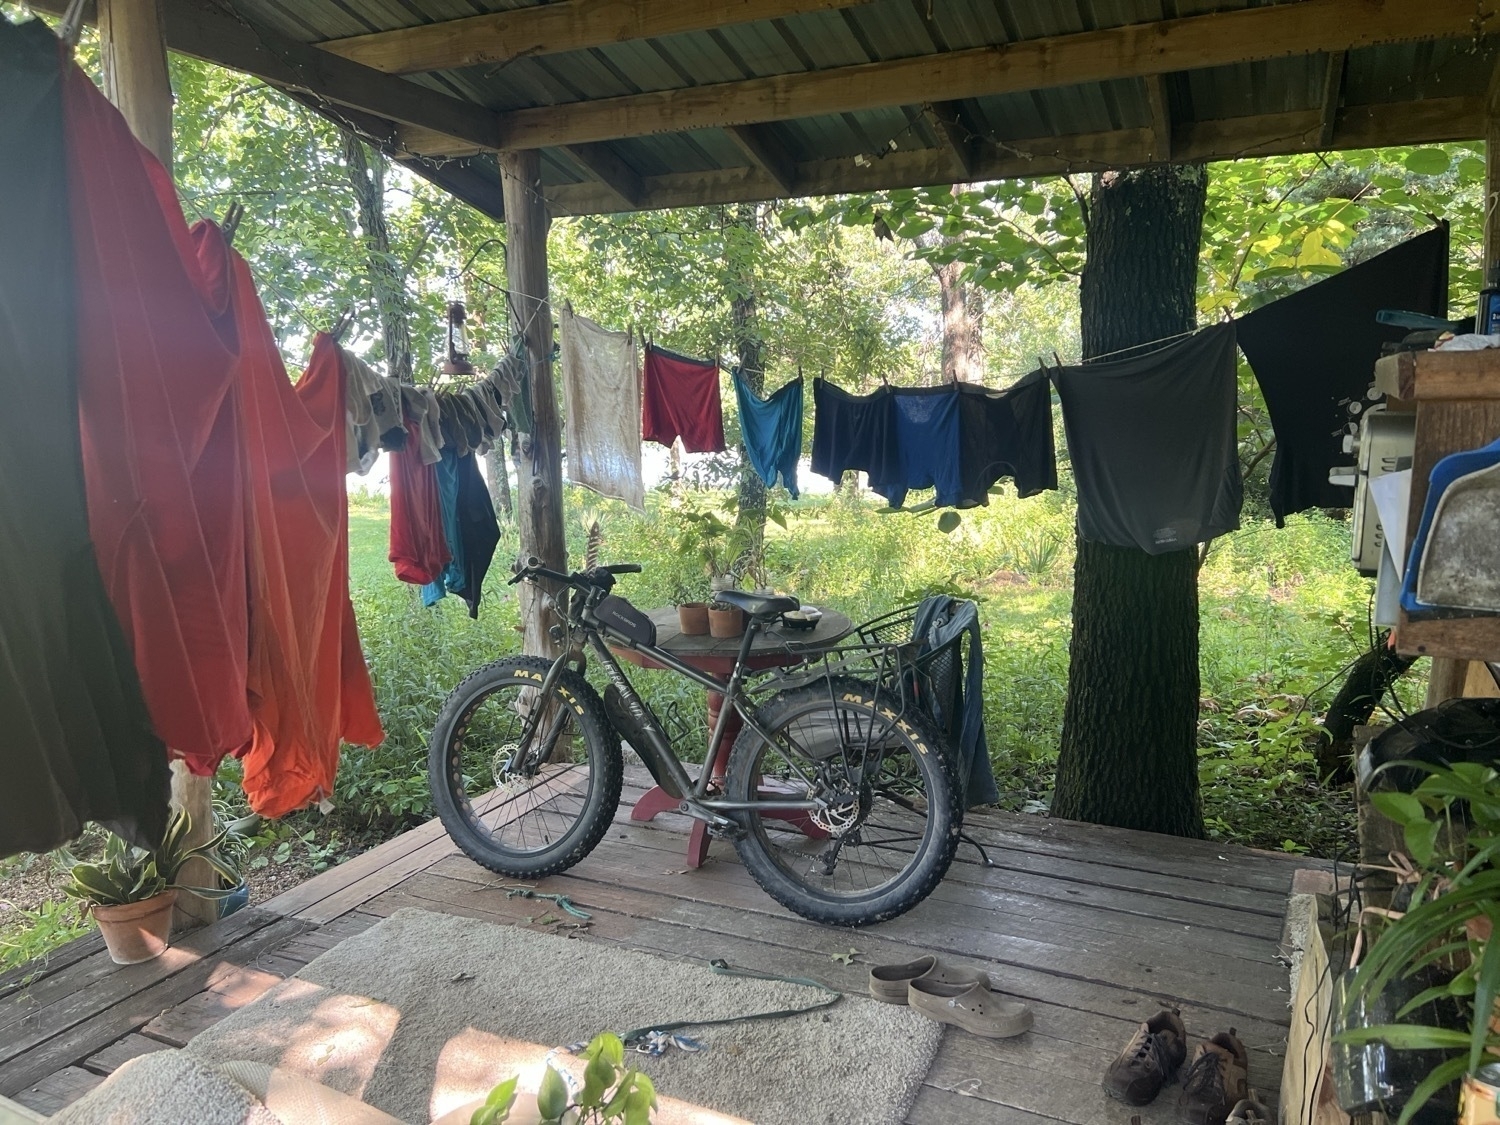 Two laundry lines strung across a wood porch deck with a variety of colorful clothing hanging to dry. Also on the porch, a fat-tire bike leans against a table. There are several shoes visible on the deck and a woodland in the background.